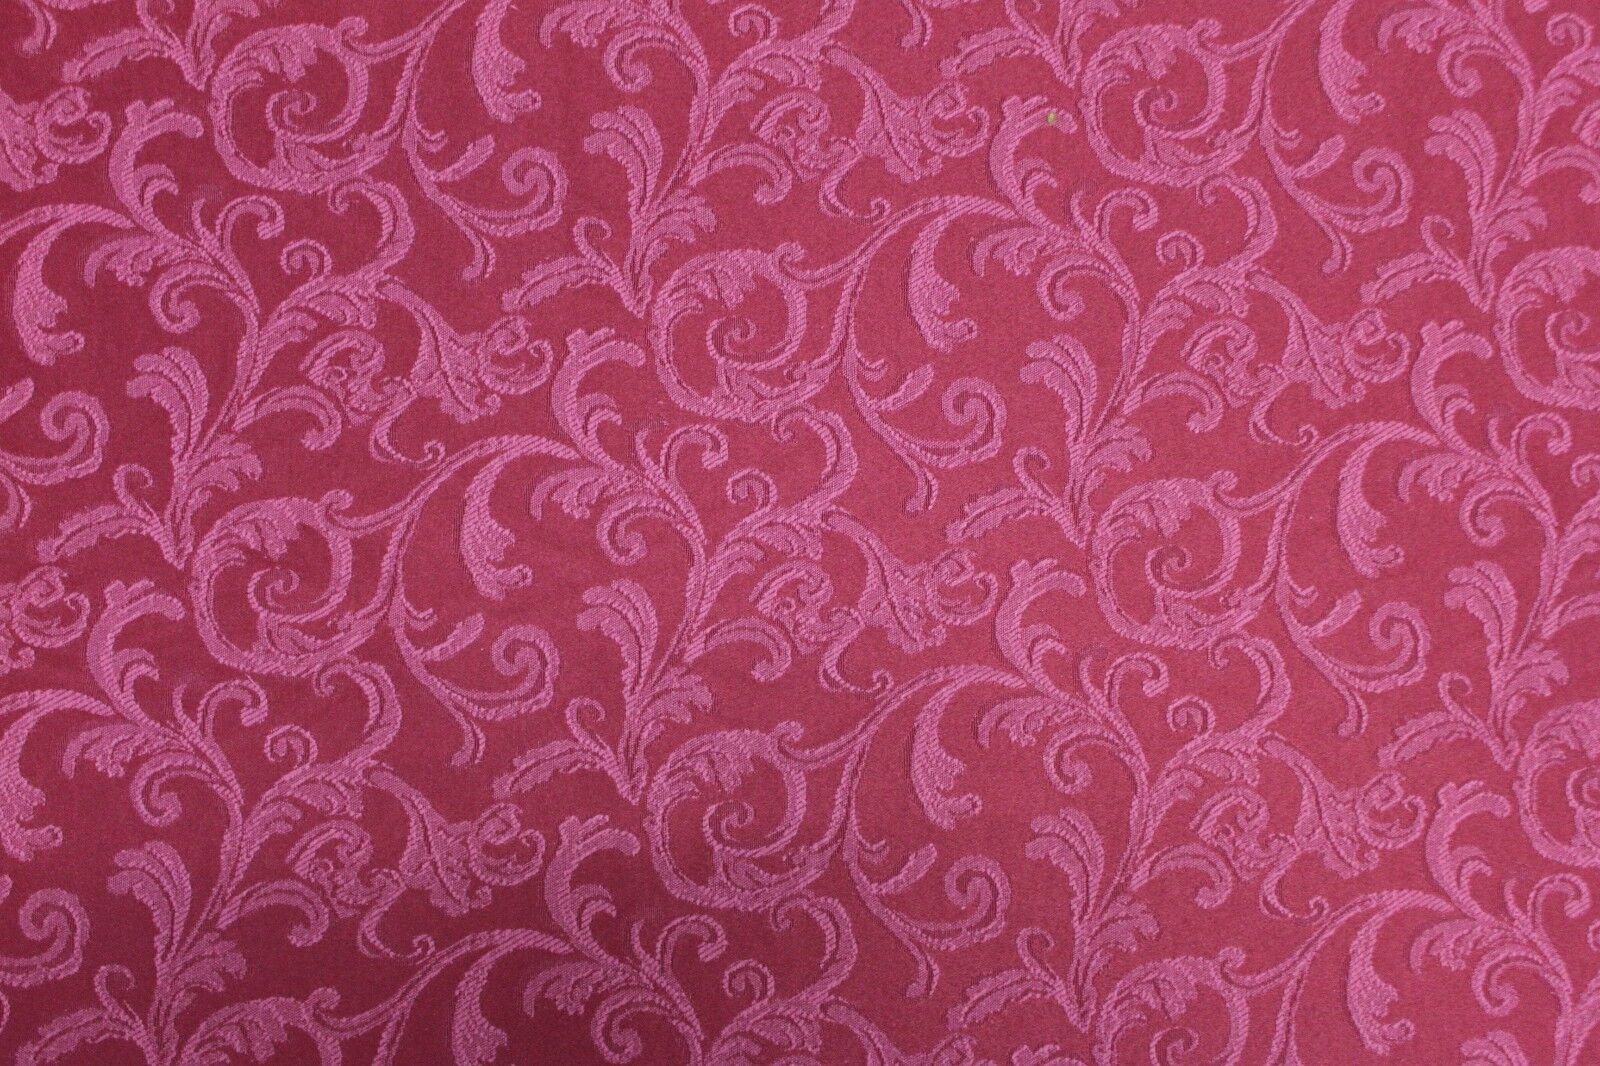 5 1/3 YARDS DARK RED DAMASK Upholstery Fabric Solid Victorian French Federal